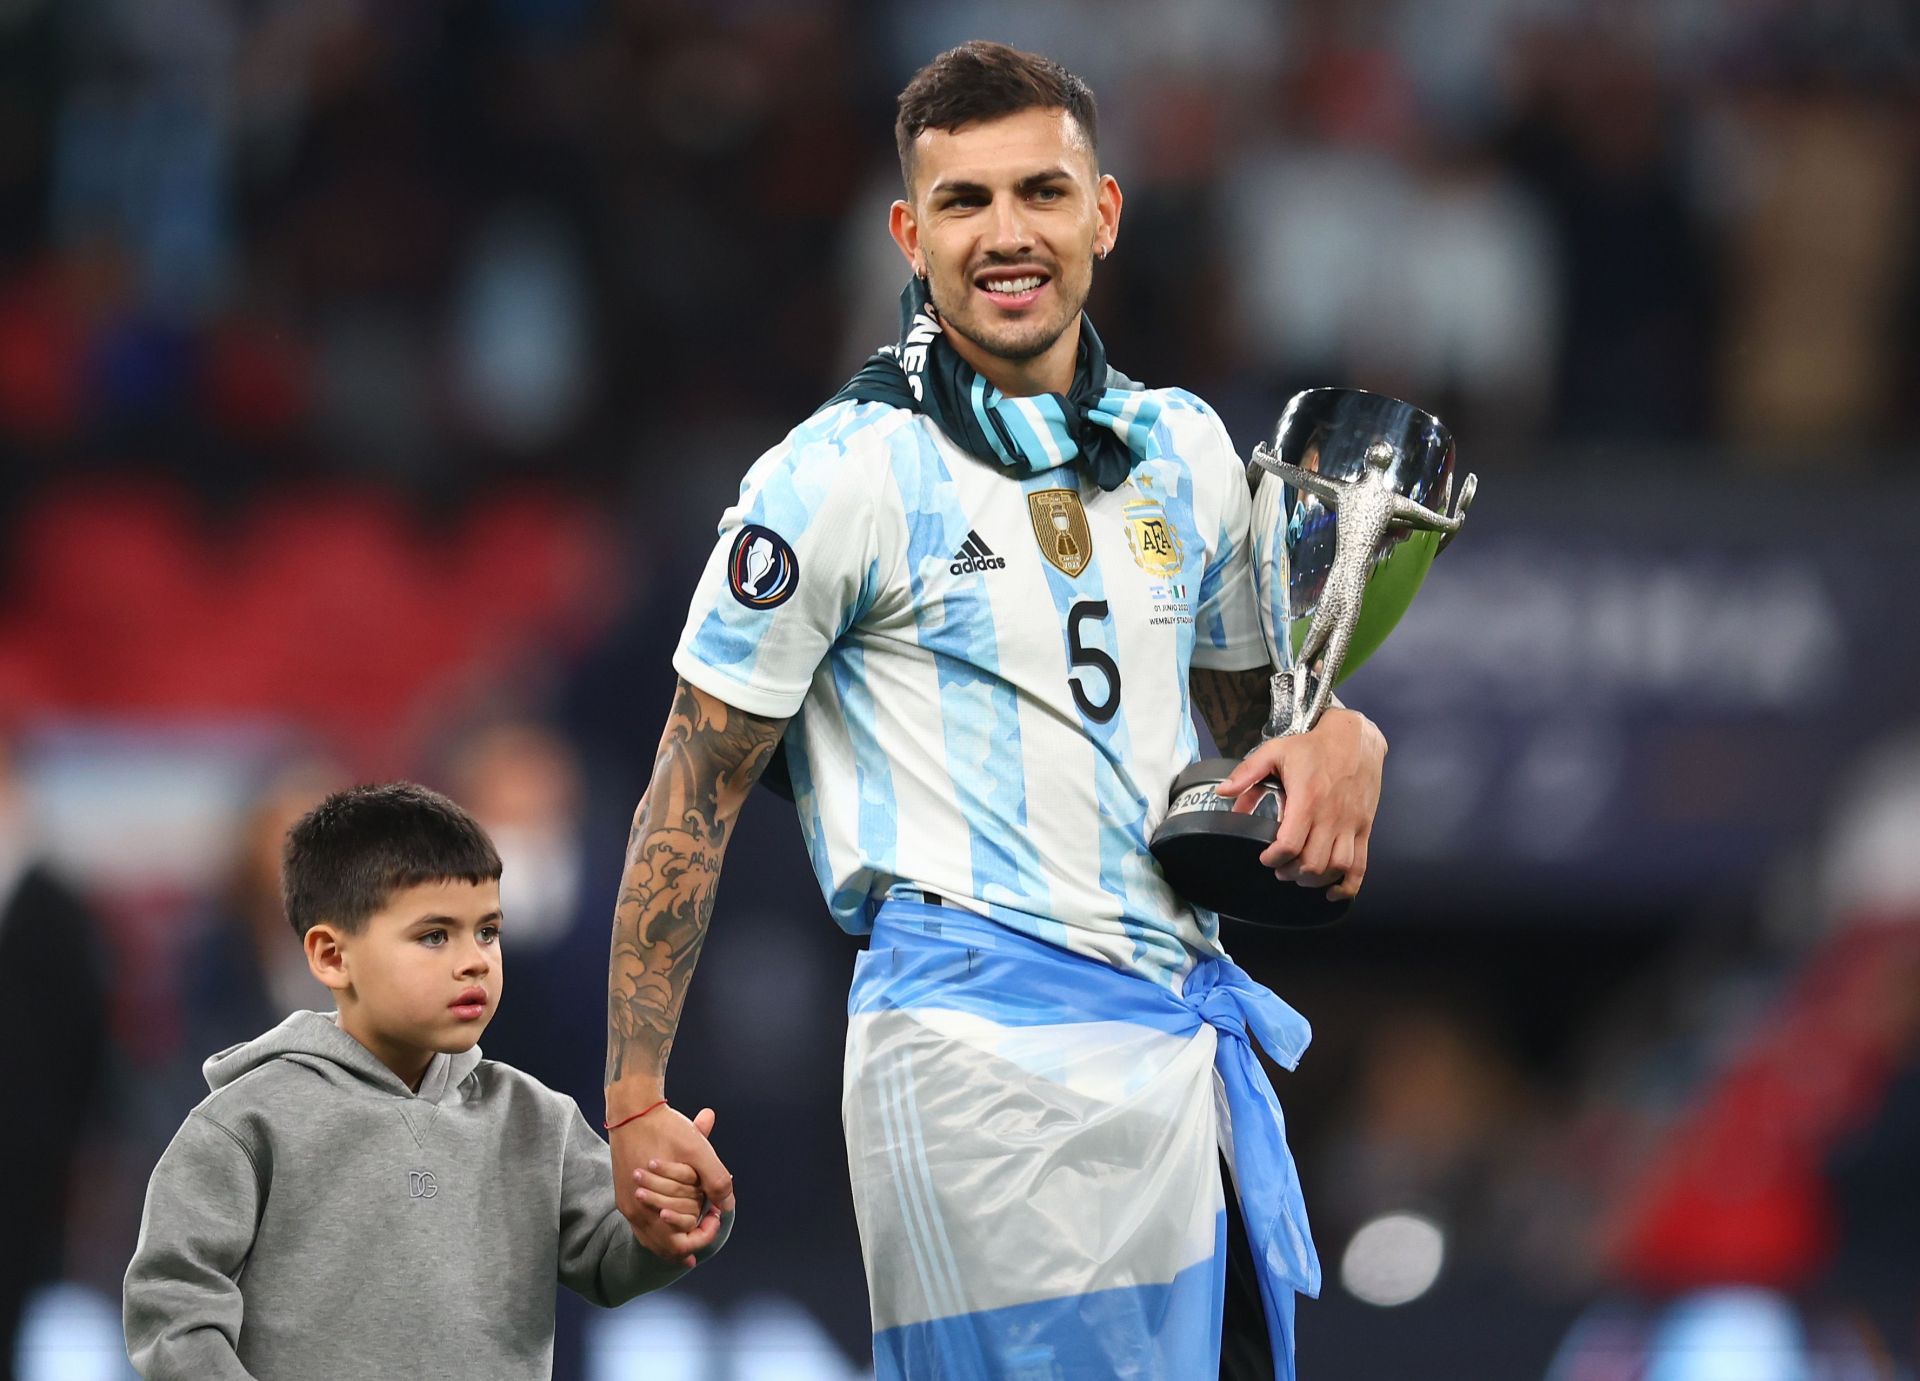 Leandro Paredes at the Finalissima 2022